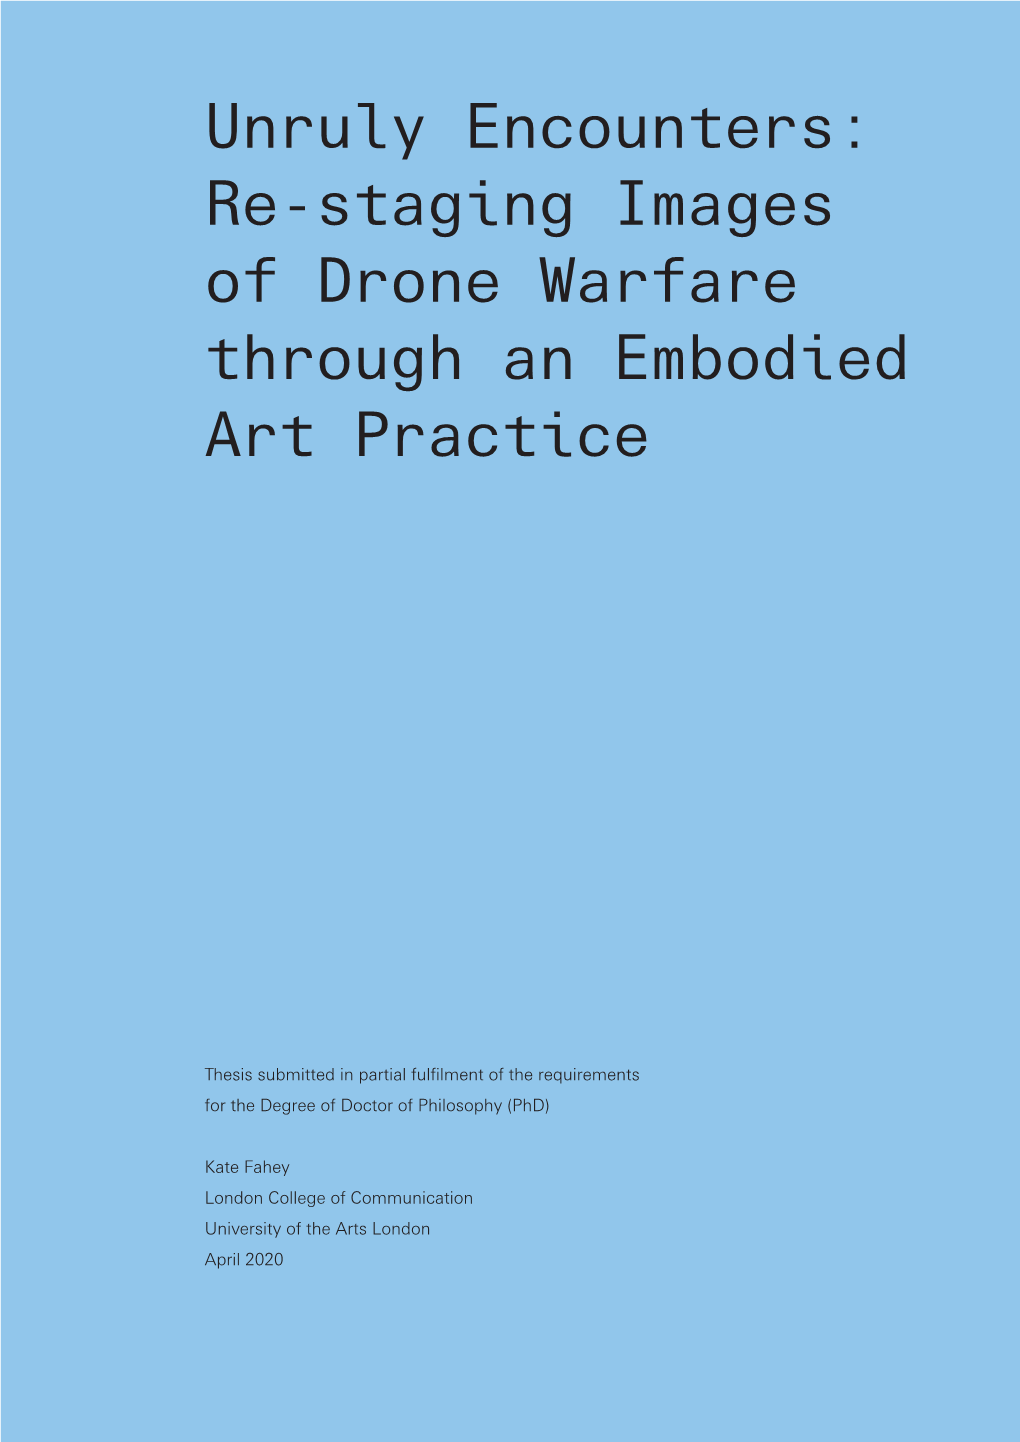 Re-Staging Images of Drone Warfare Through an Embodied Art Practice